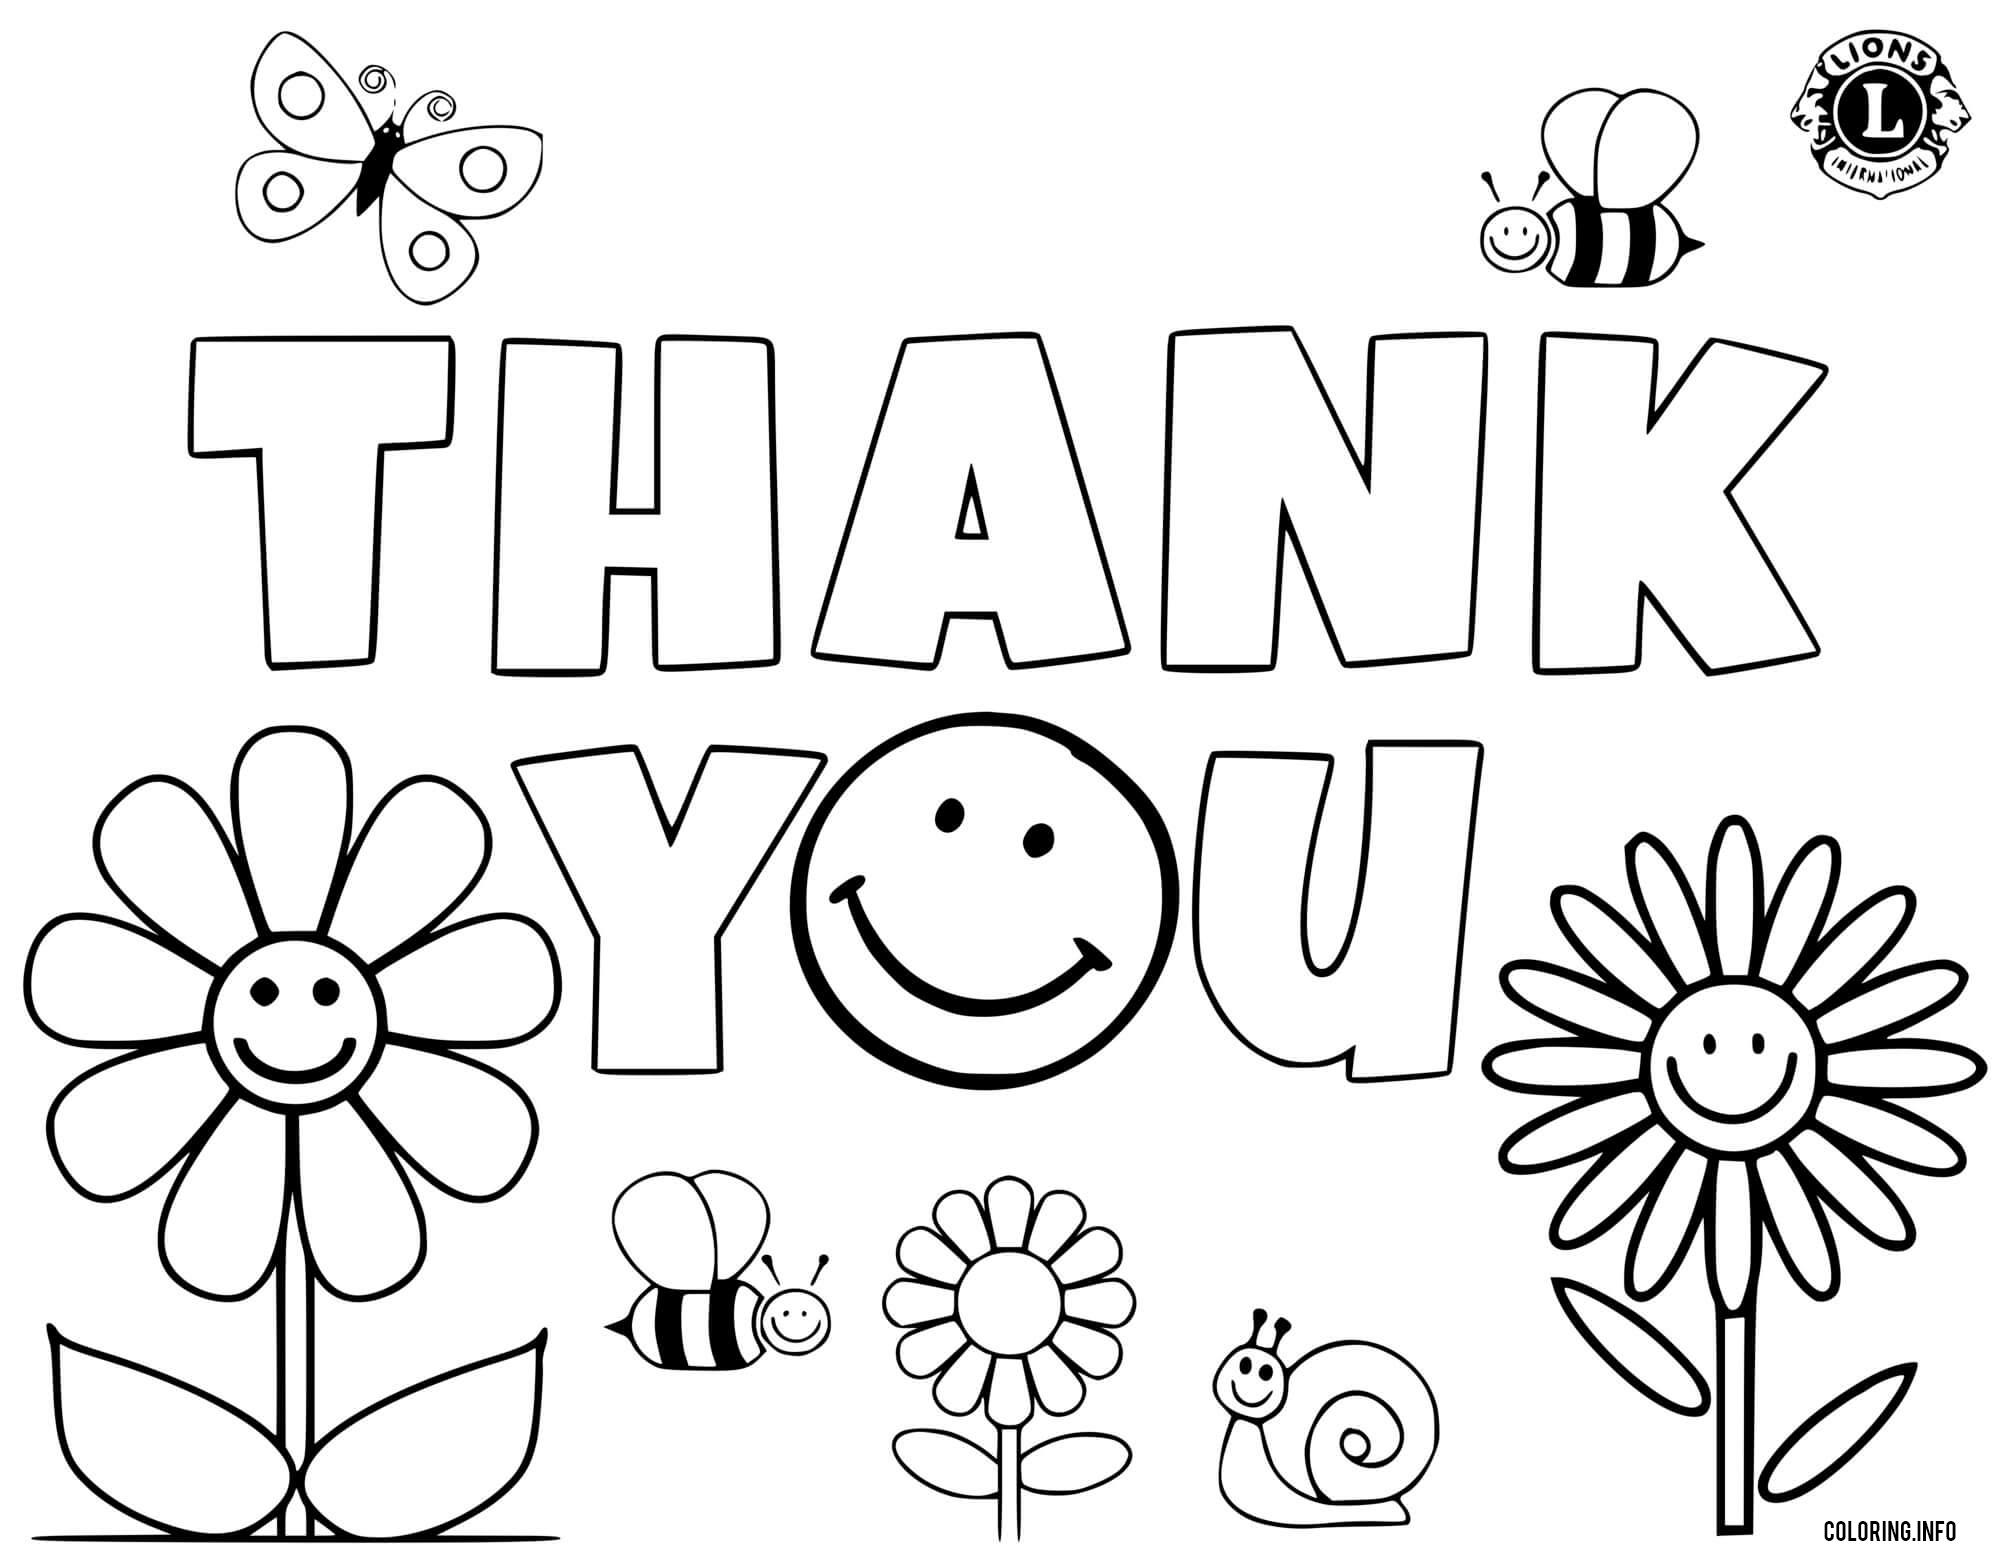 Thank You Flowers coloring